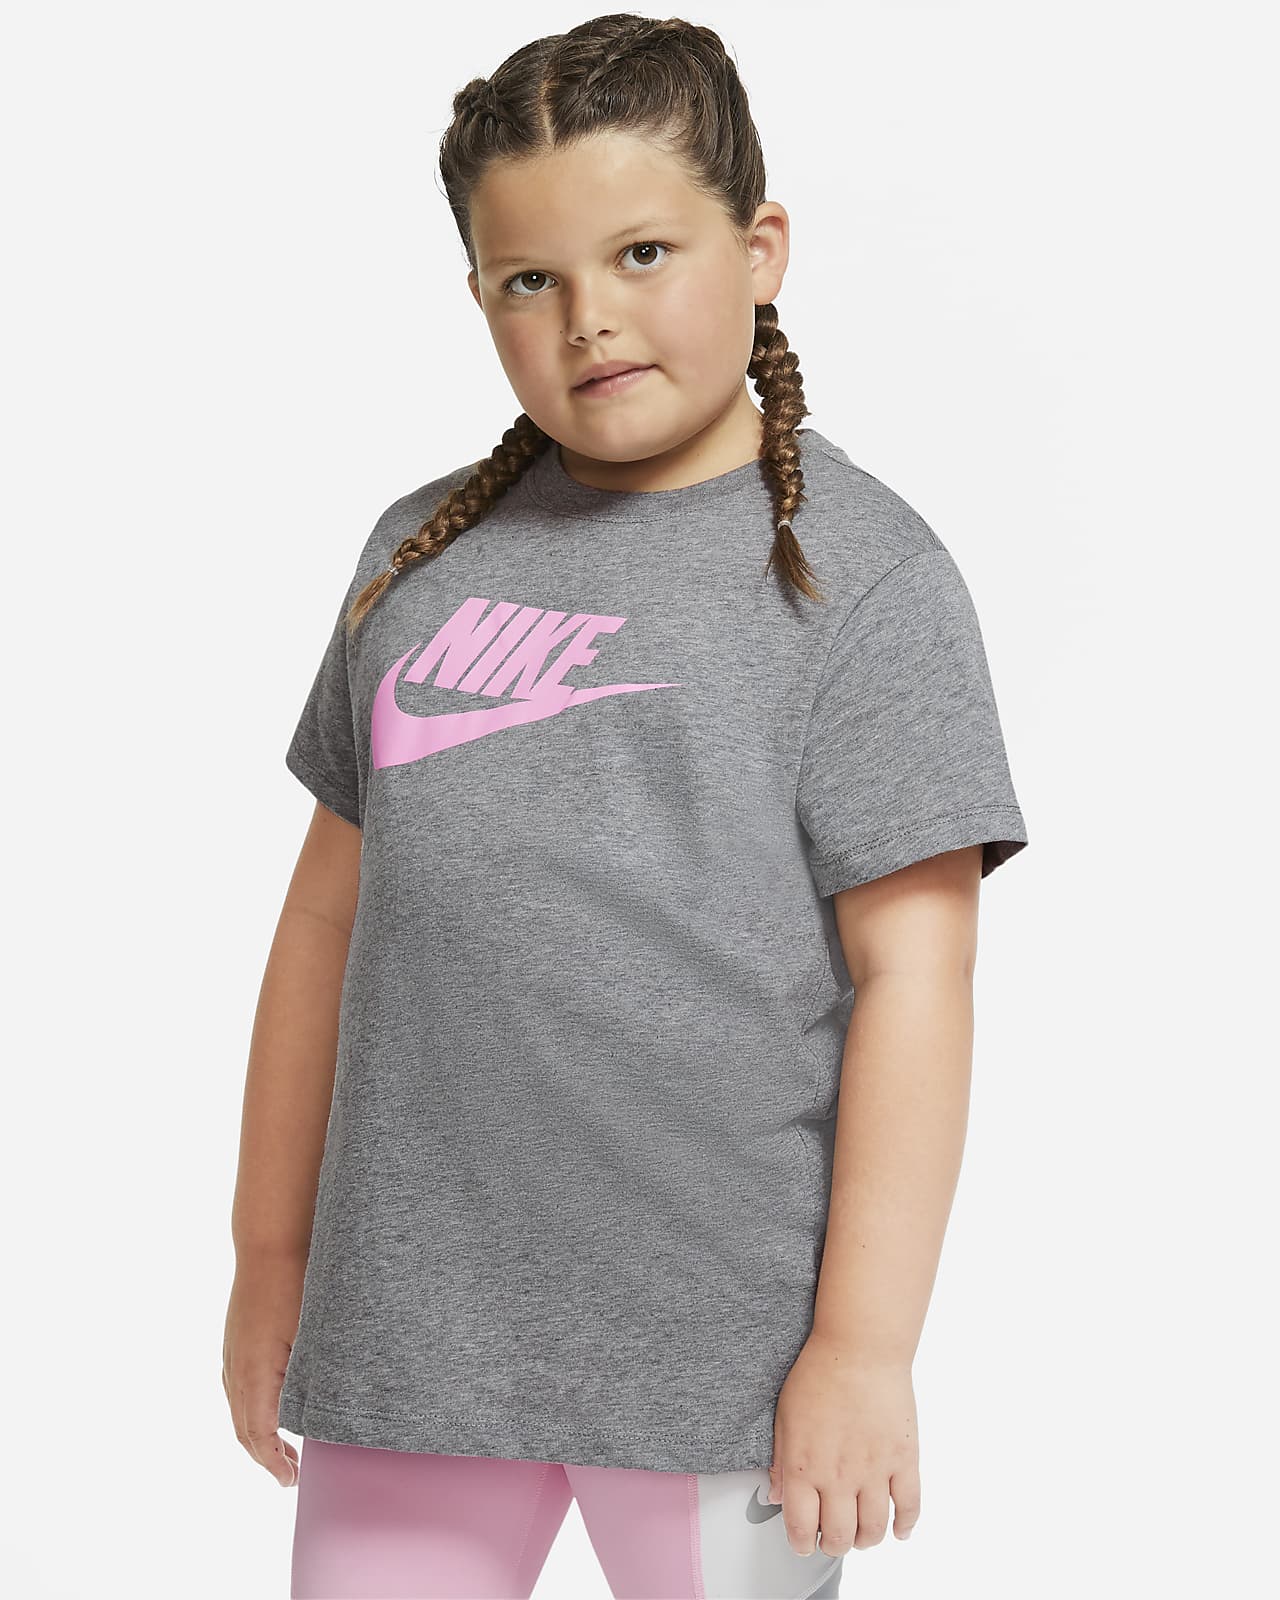 Buy > exclusive nike outfits > in stock